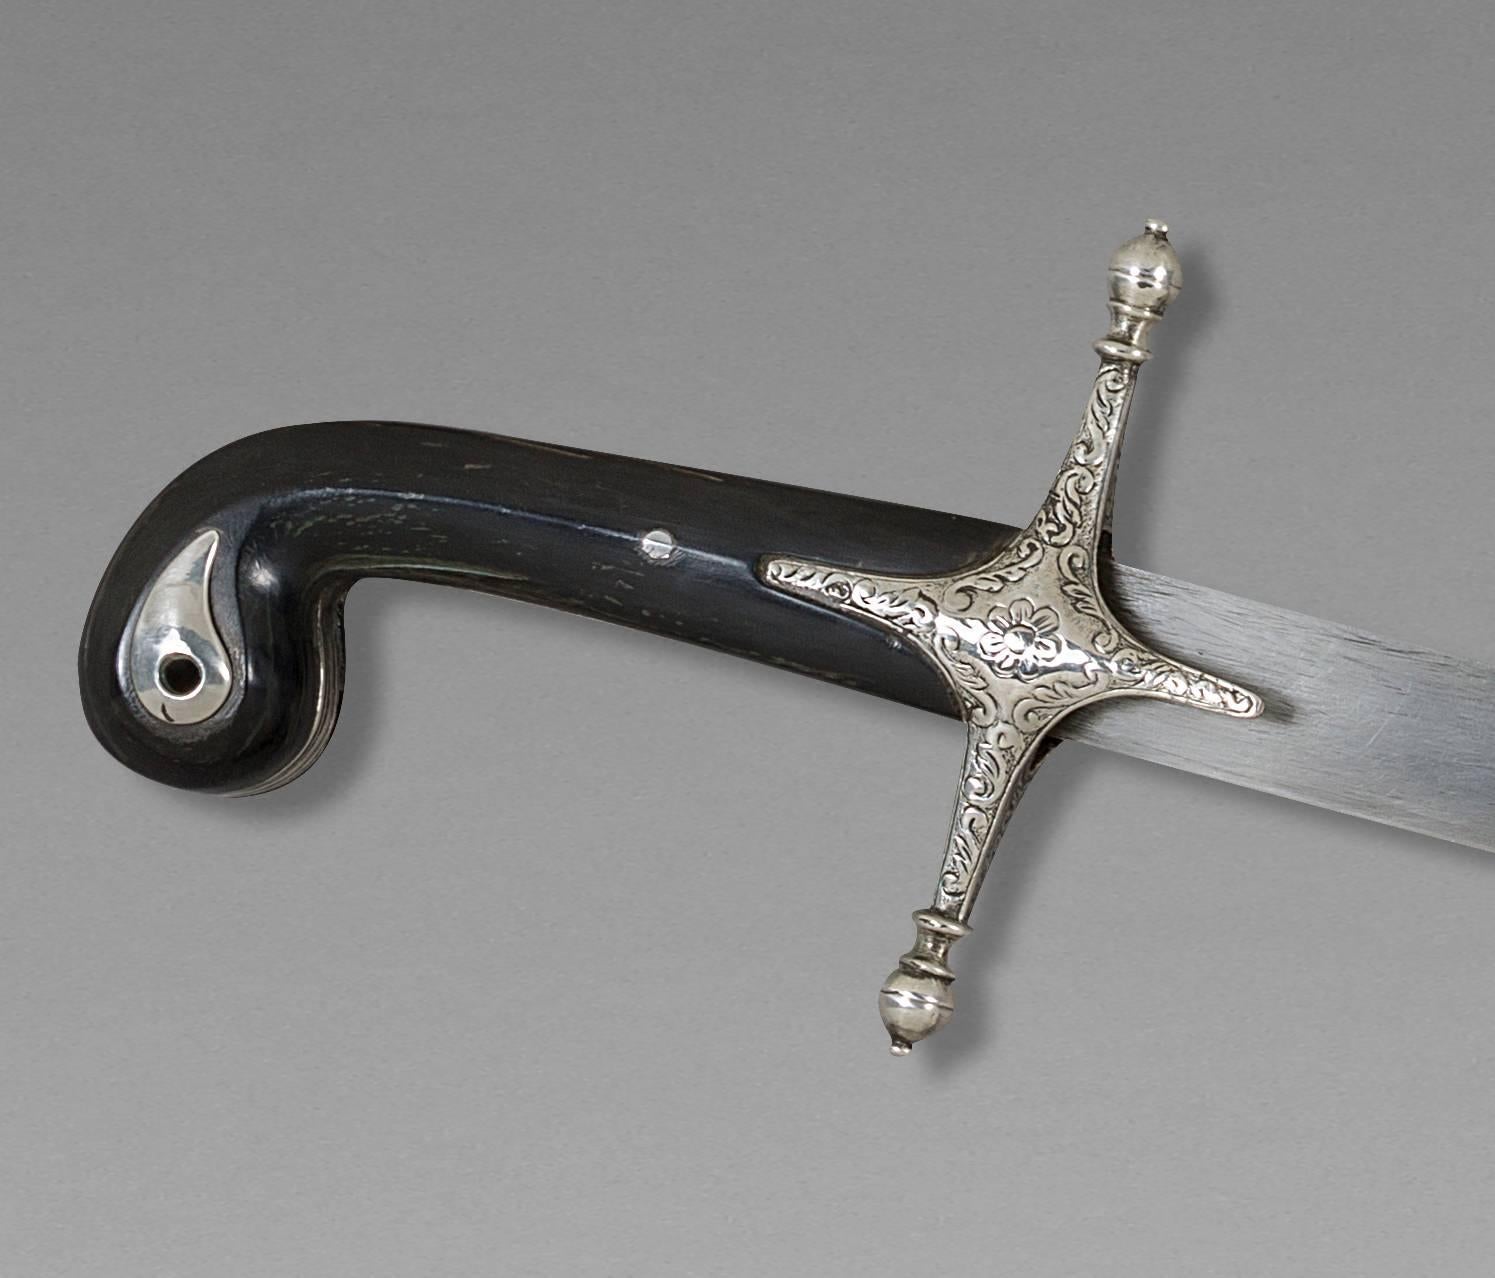 Oriental saber, also called Shamshir
Ottoman Empire 
late 18th century

Handle in horn, silver mounted, Damascus blade, scabbard garnished of black leather.

Measure: Whole saber 39 1/2